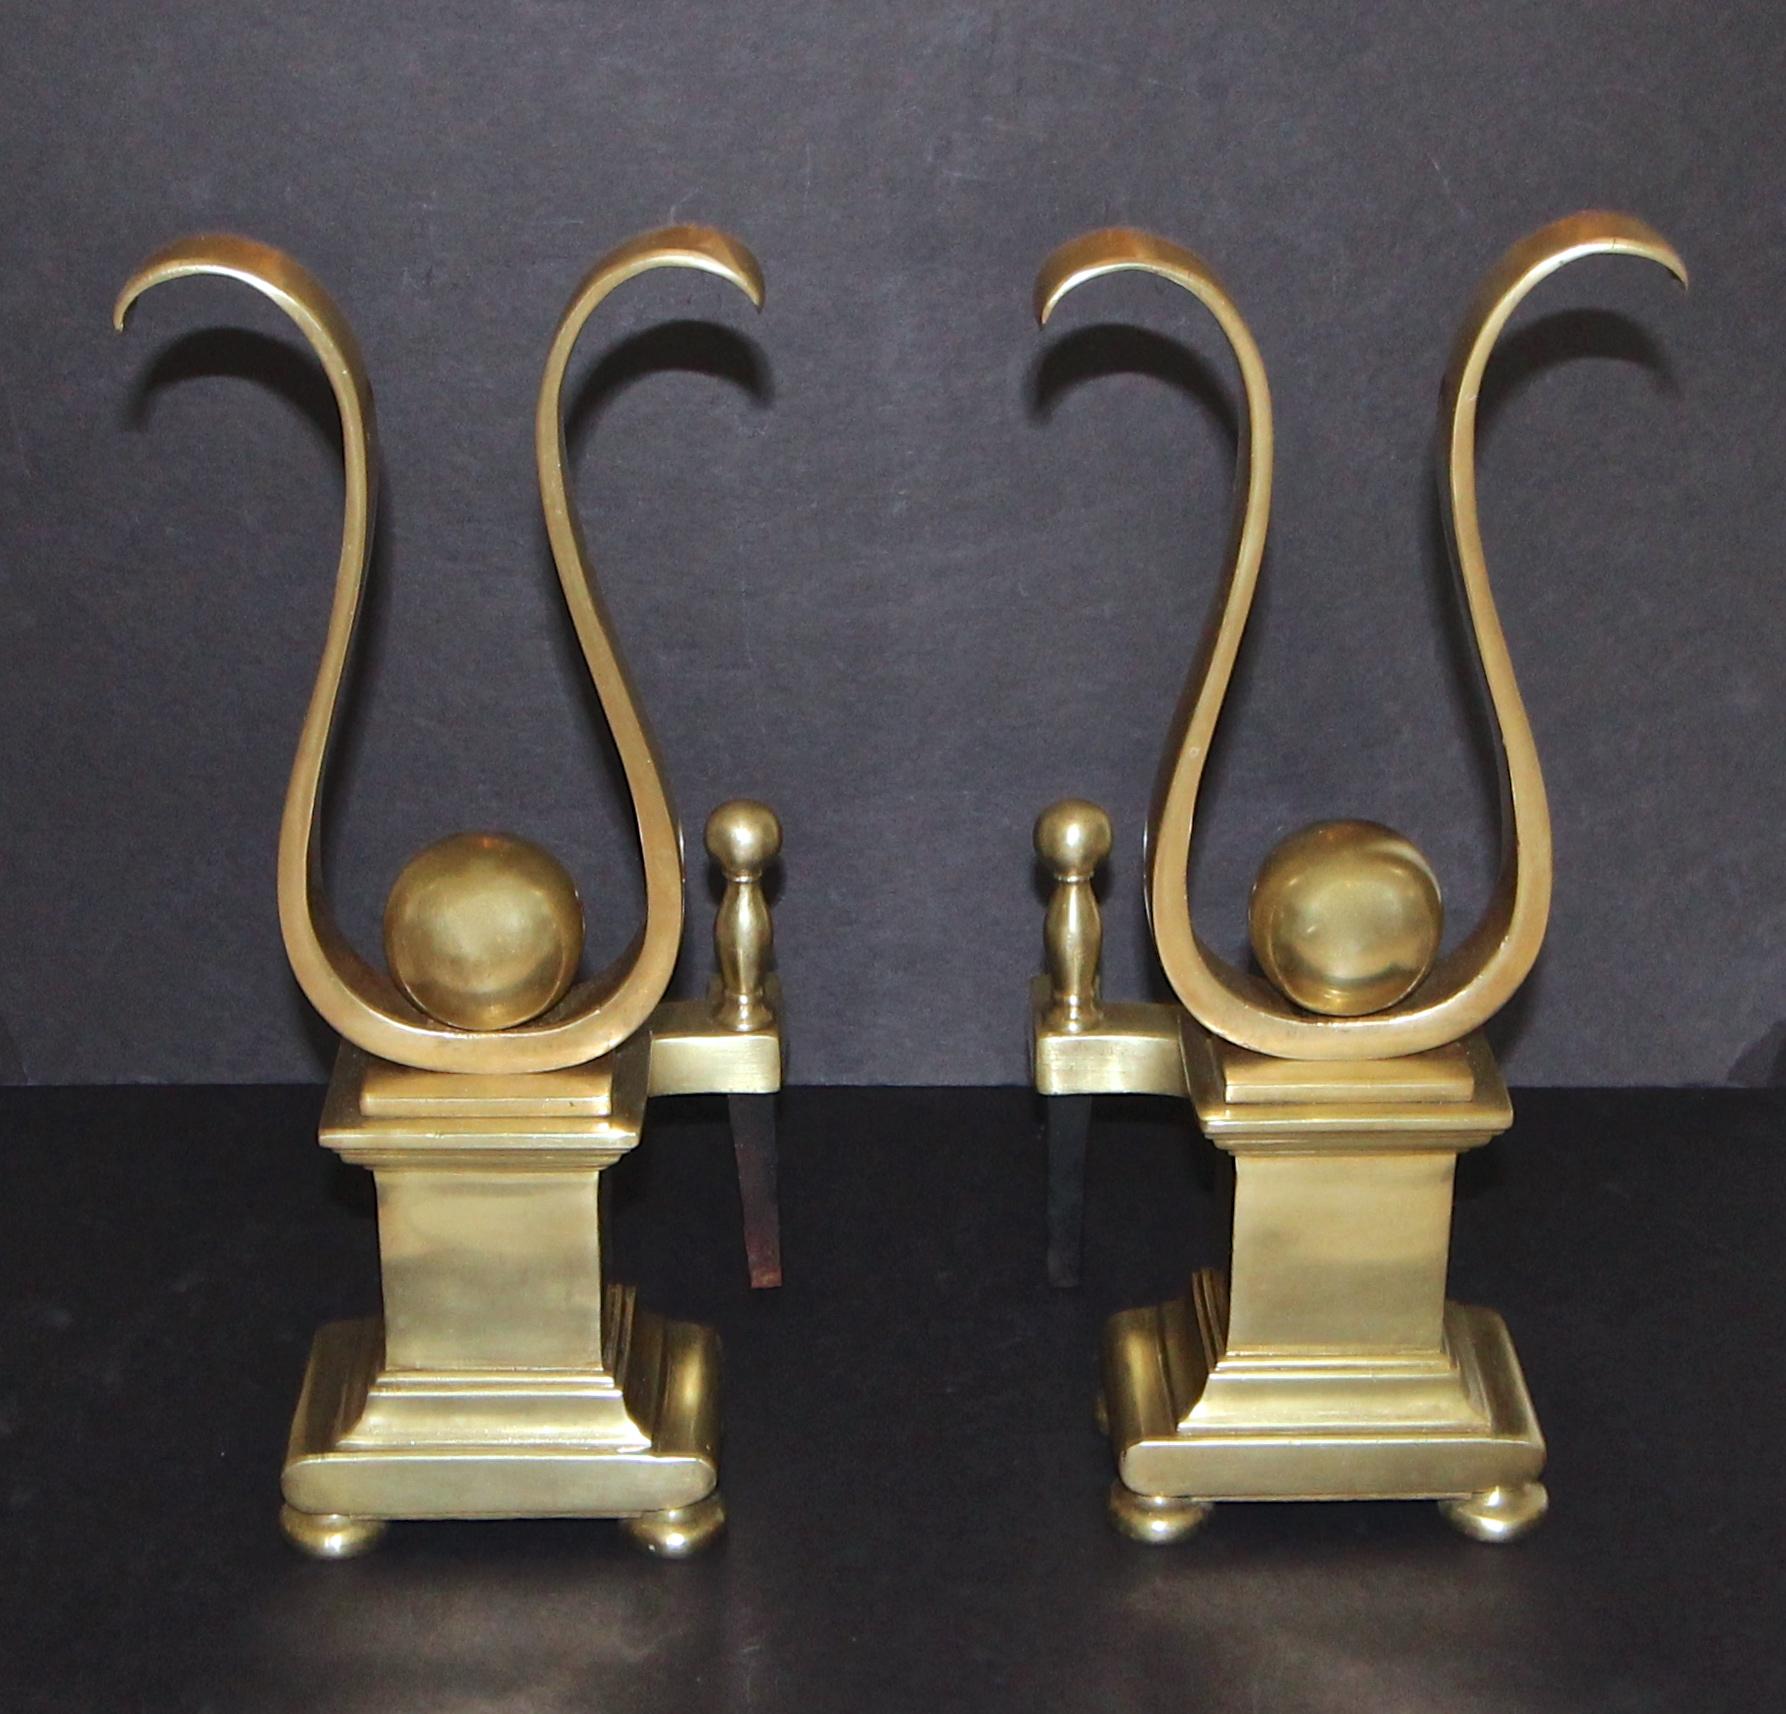 Pair of heavy solid brass lyre shape motif andirons. A stylized version of a Classic silhouette that can blend with both traditional and eclectic interiors.